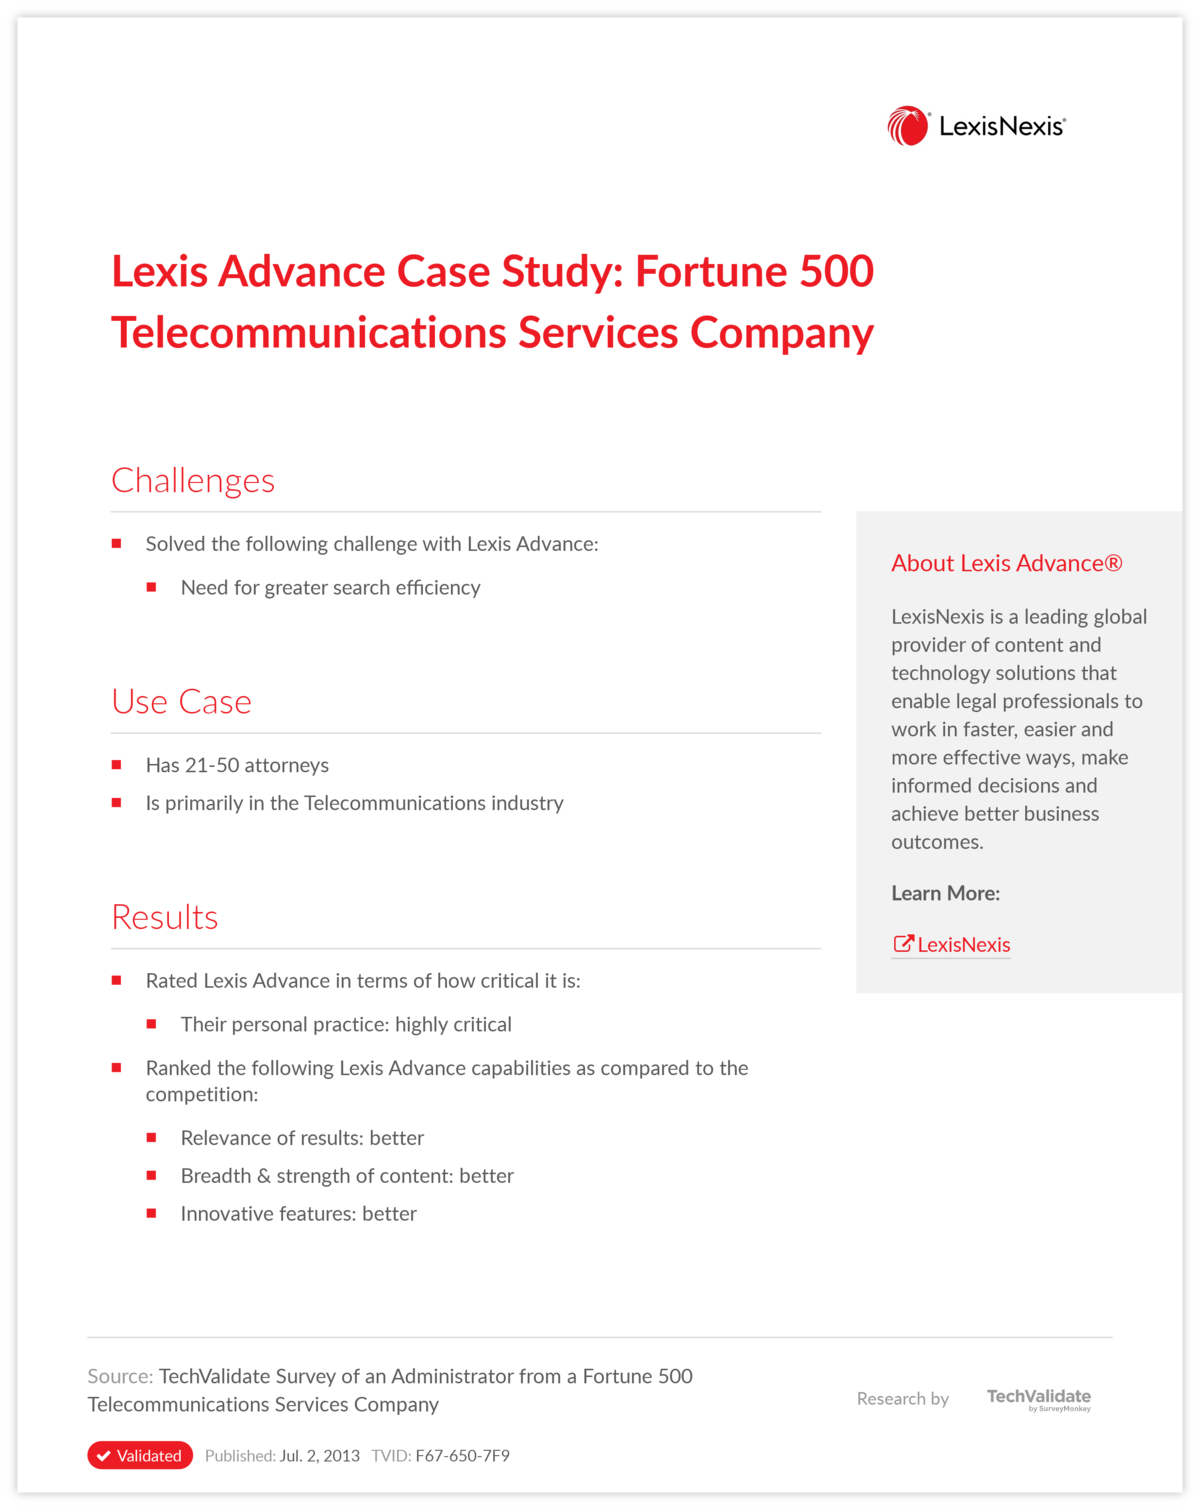 Lexis Advance Case Study: Fortune 500 Telecommunications Services Company